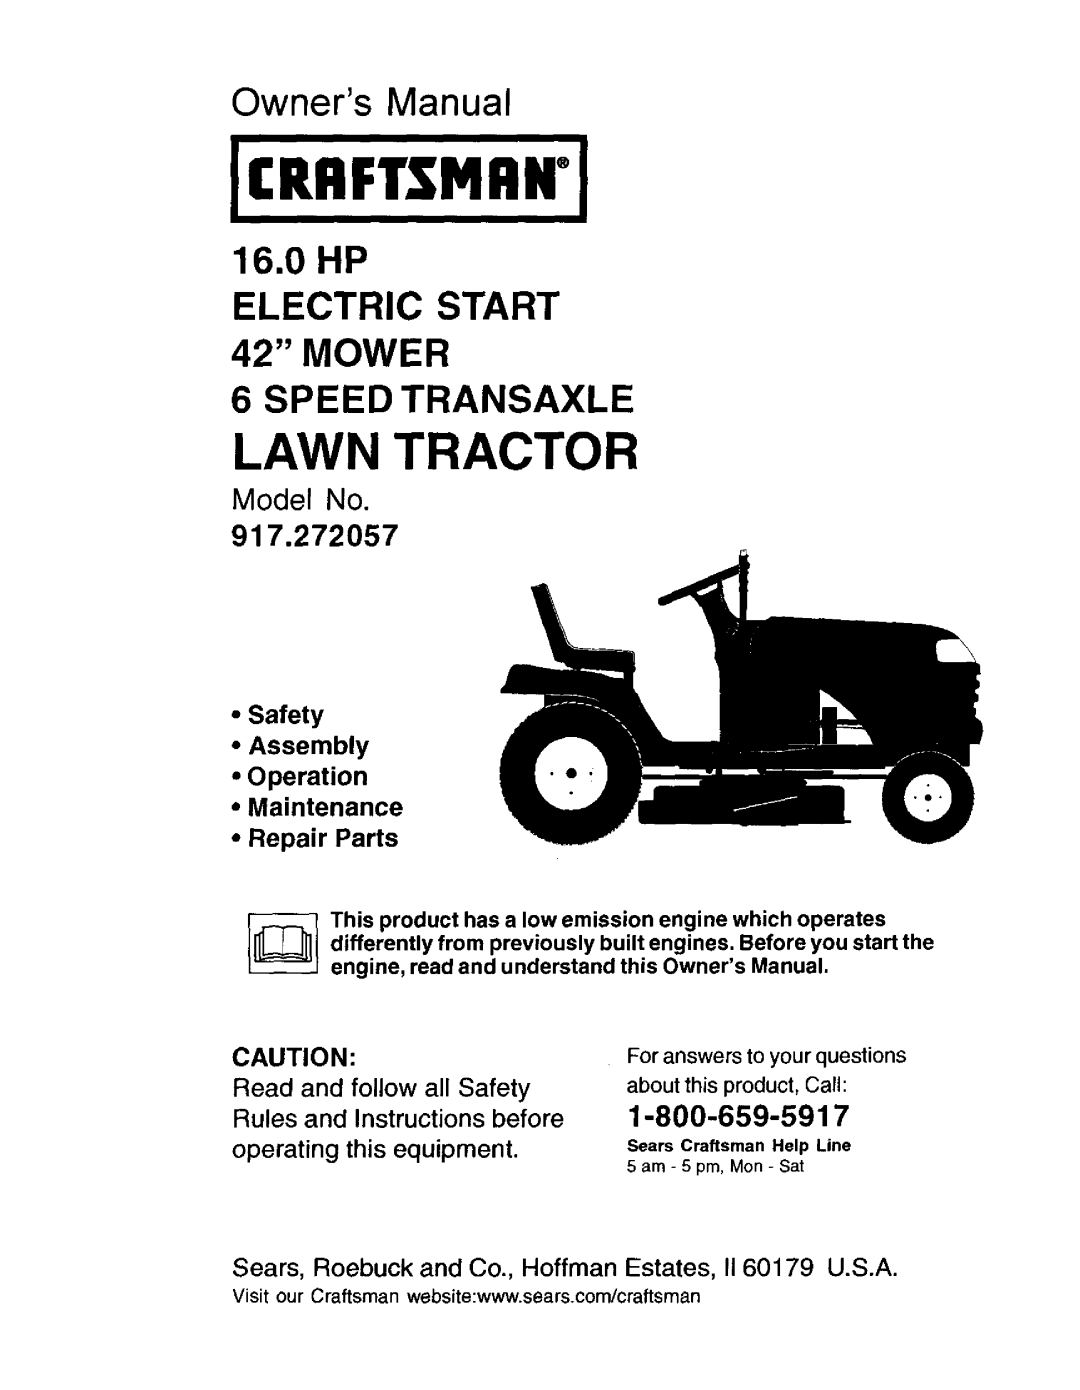 Craftsman 917.272057 owner manual 1-800-659-5917, Lawn Tractor, Owners Manual, ELECTRIC START 42 MOWER 6 SPEED TRANSAXLE 